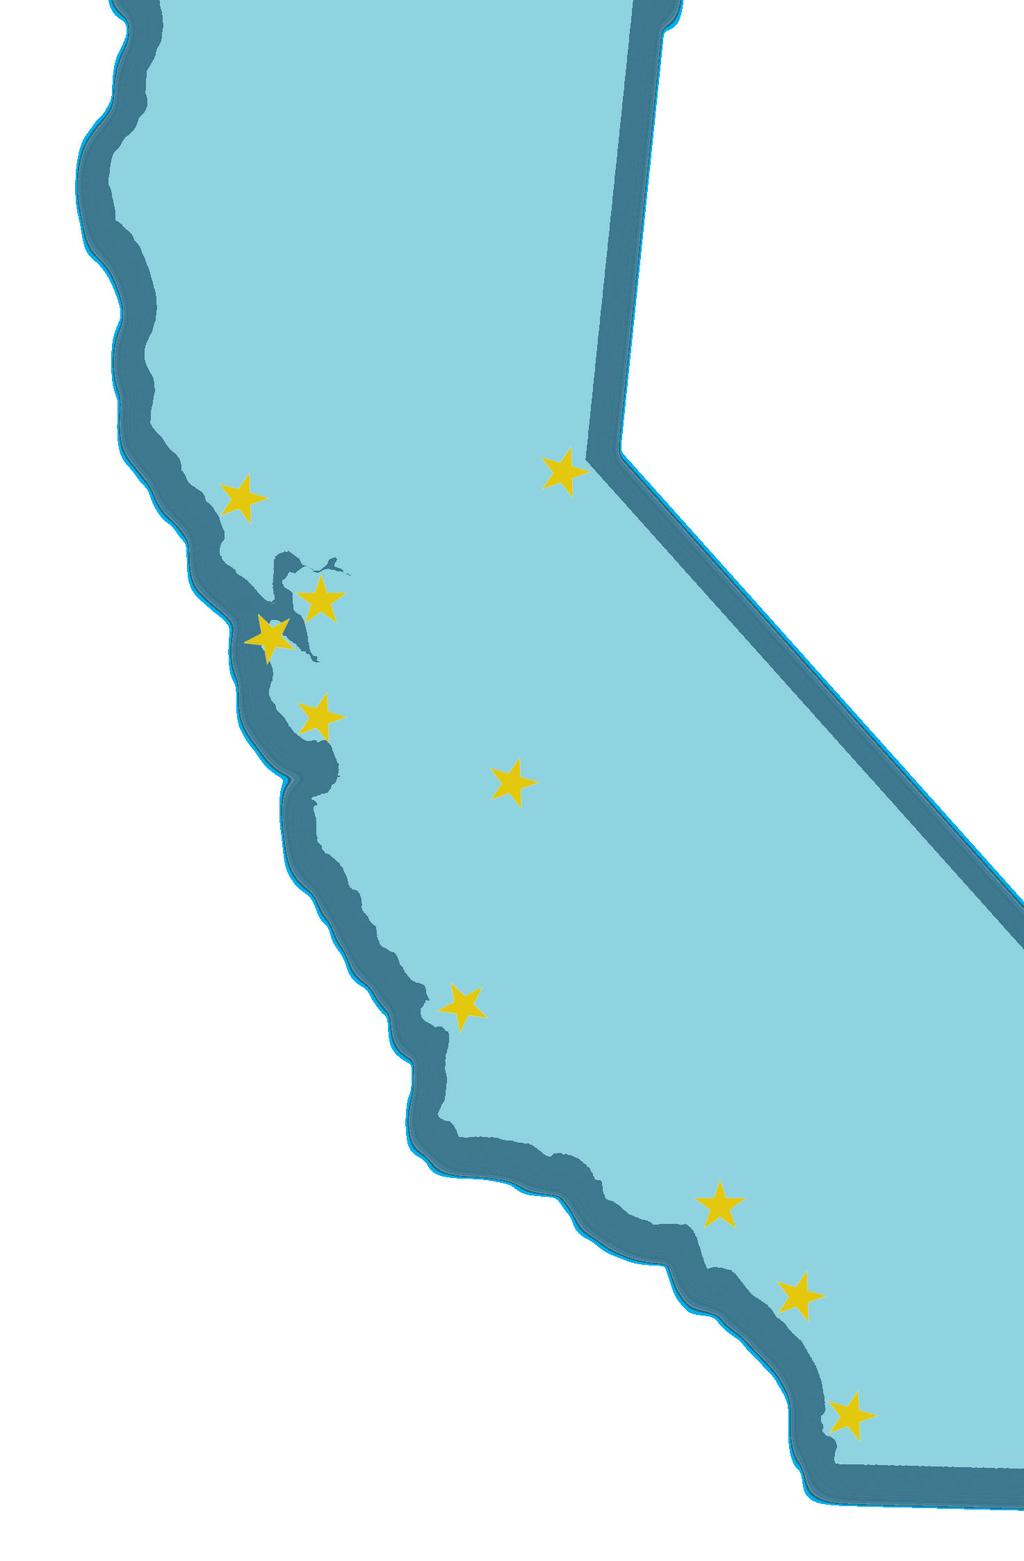 conclusion To make the vision of health care reform a reality in California and across the country, members of the state and nation s Title X provider network must remain vital access points for the